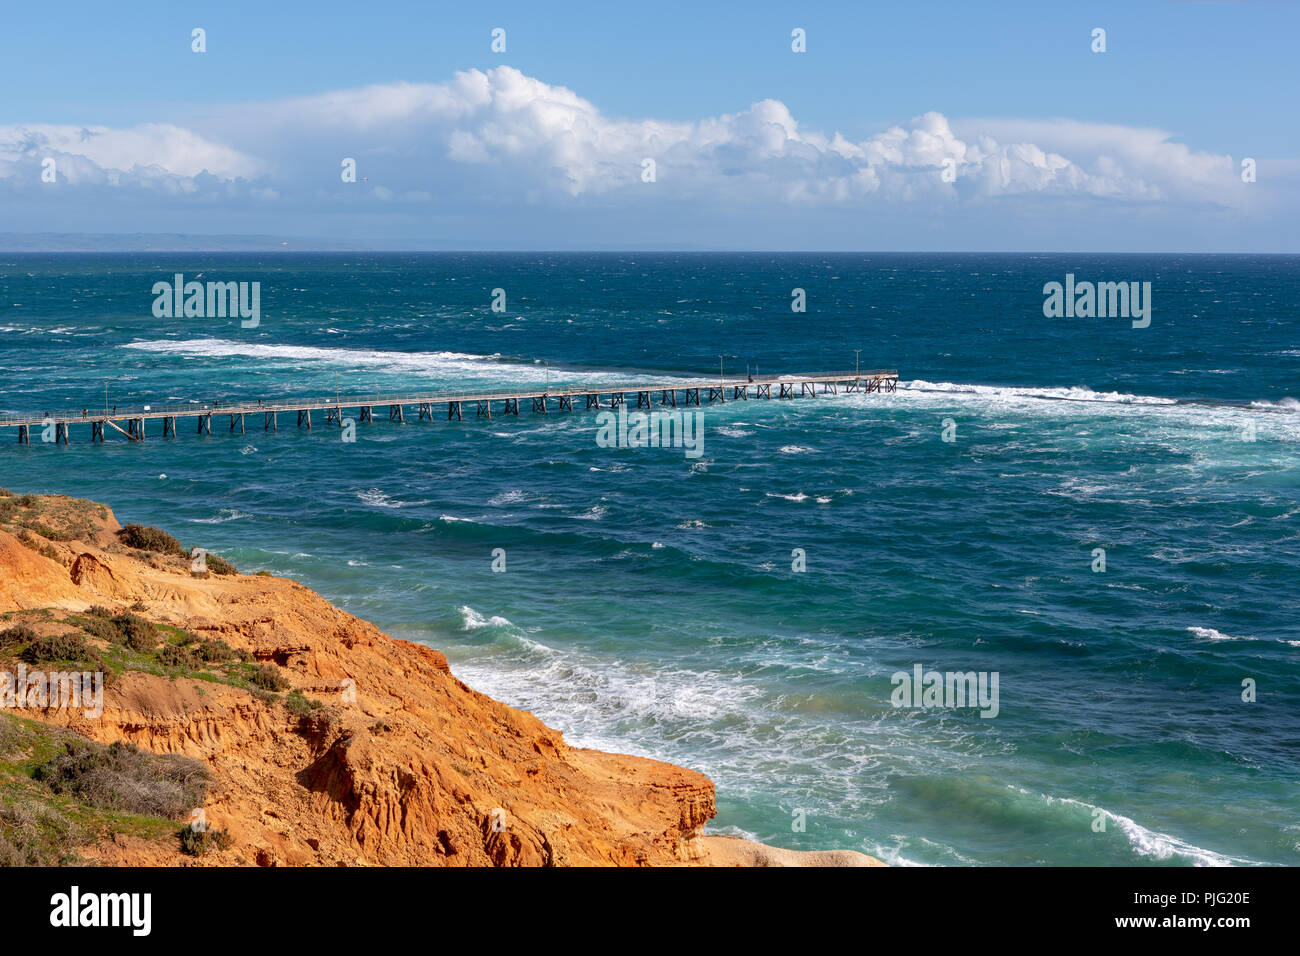 The Port Noarlunga Jetty in rough seas from the northern cliff face in South Australia on the 6th September 2018 Stock Photo